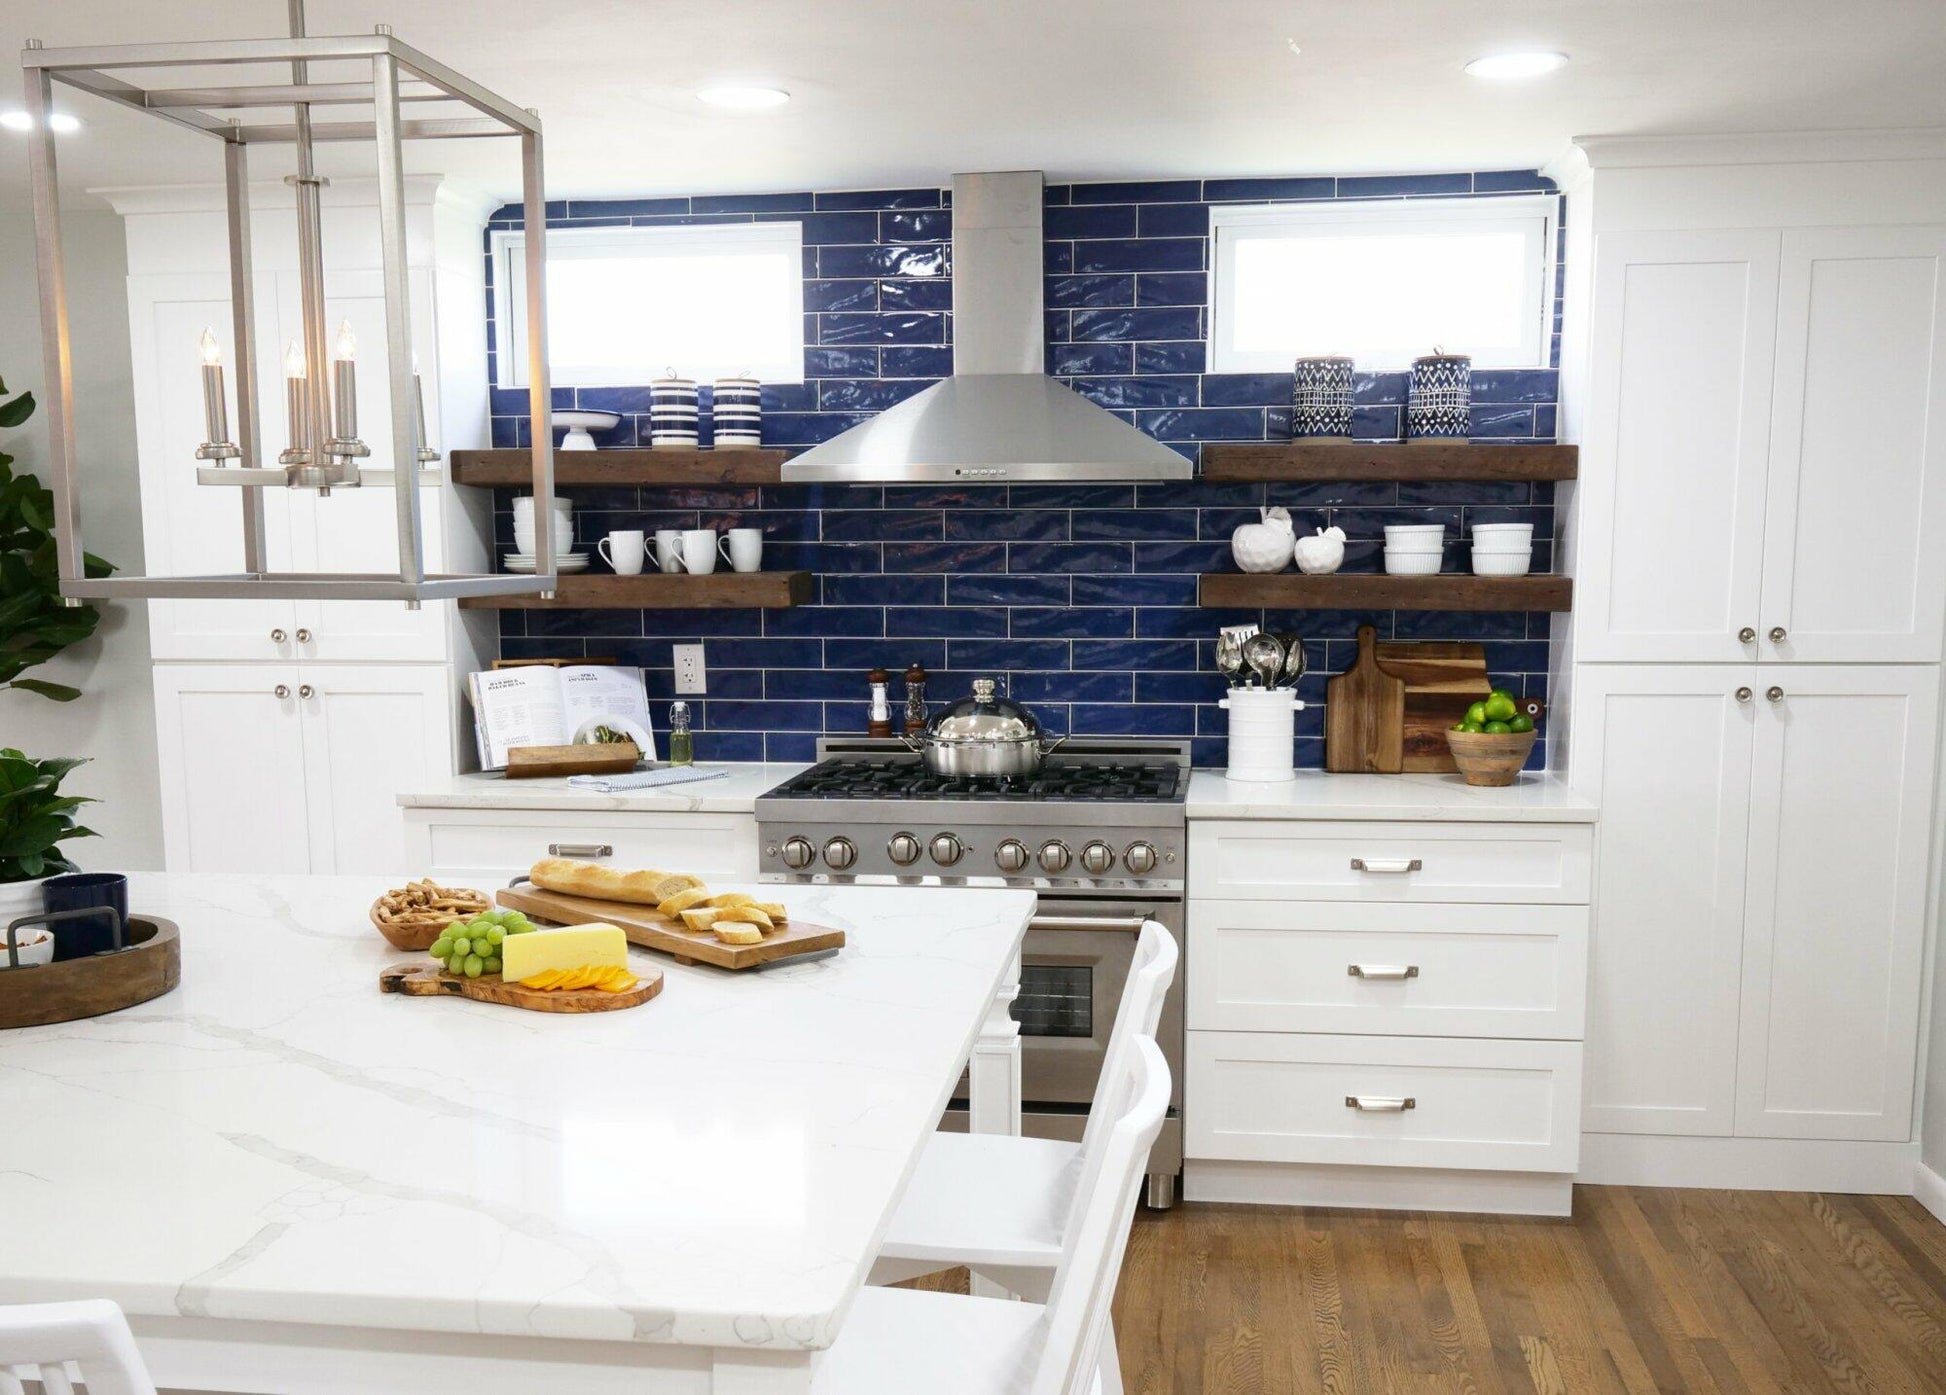 floating reclaimed barnwood shelves in a kitchen. Four shelves are displayed on a subway tile backsplash supporting dishes, glasses, and vases.